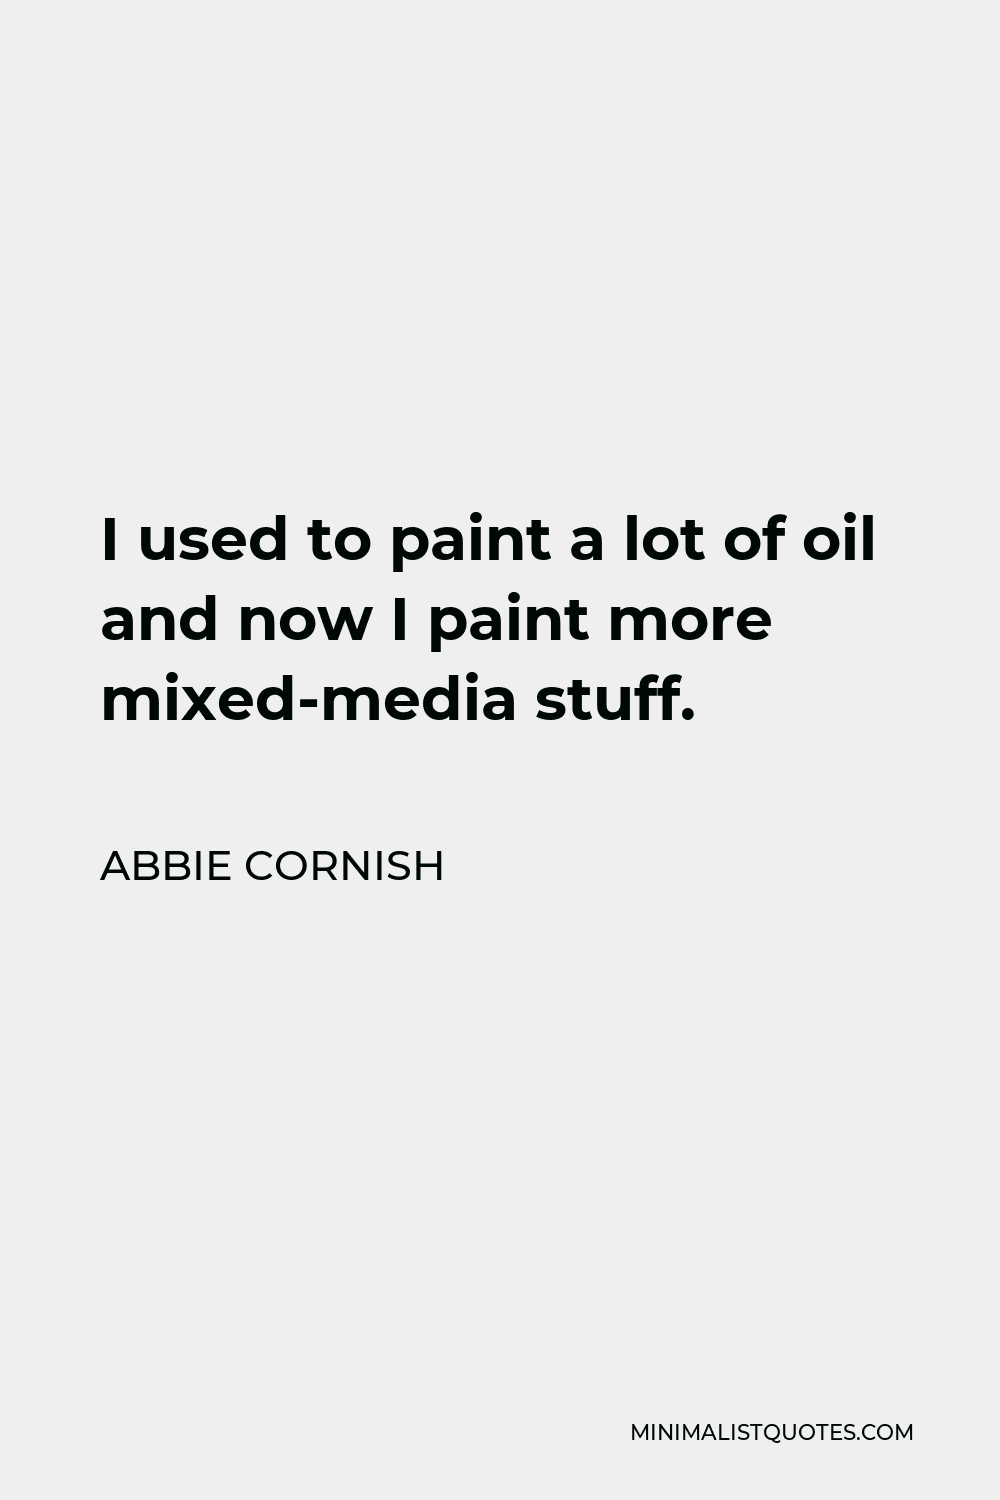 Abbie Cornish Quote - I used to paint a lot of oil and now I paint more mixed-media stuff.